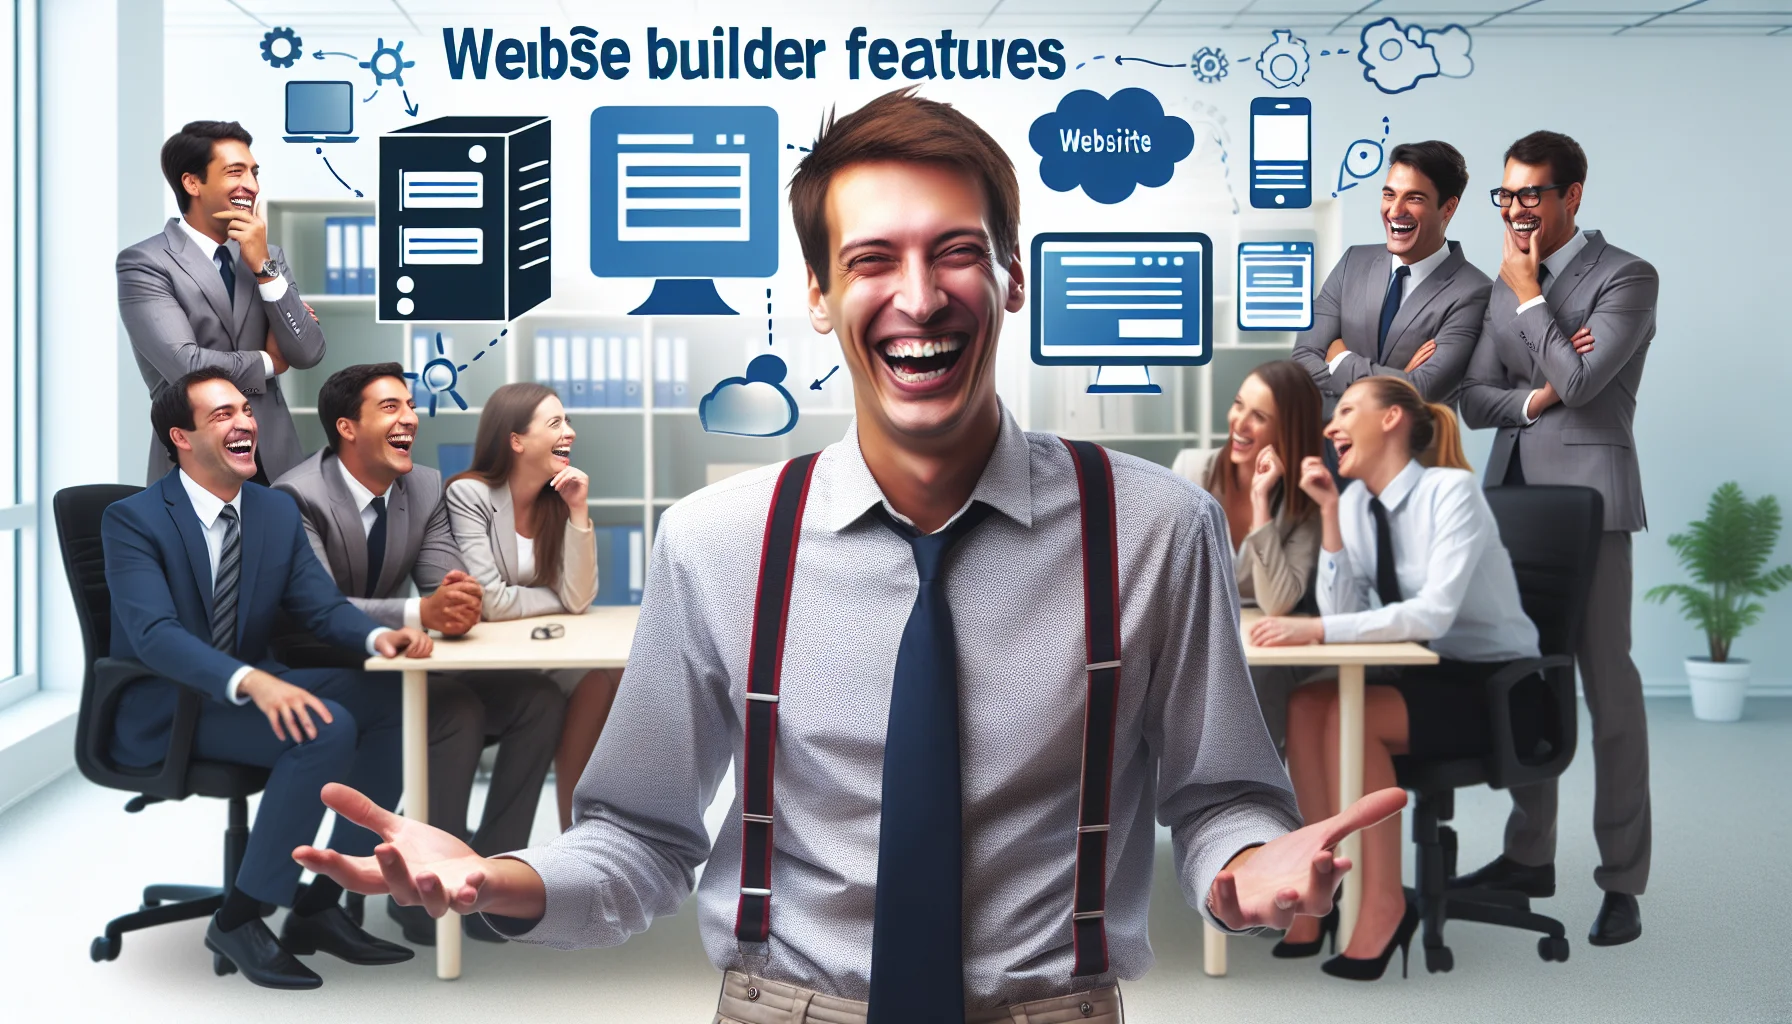 Create a humorous and enticing image showcasing a tall, humorous, and savvy web developer with short brown hair, dressed in casual business attire, presenting website builder features. This scene takes place in a modern office environment filled with associates, who are equally diverse in ethnicity and gender, laughing together. Add elements of web hosting in the background, such as servers, website icons and cloud graphics, to reinforce the theme.